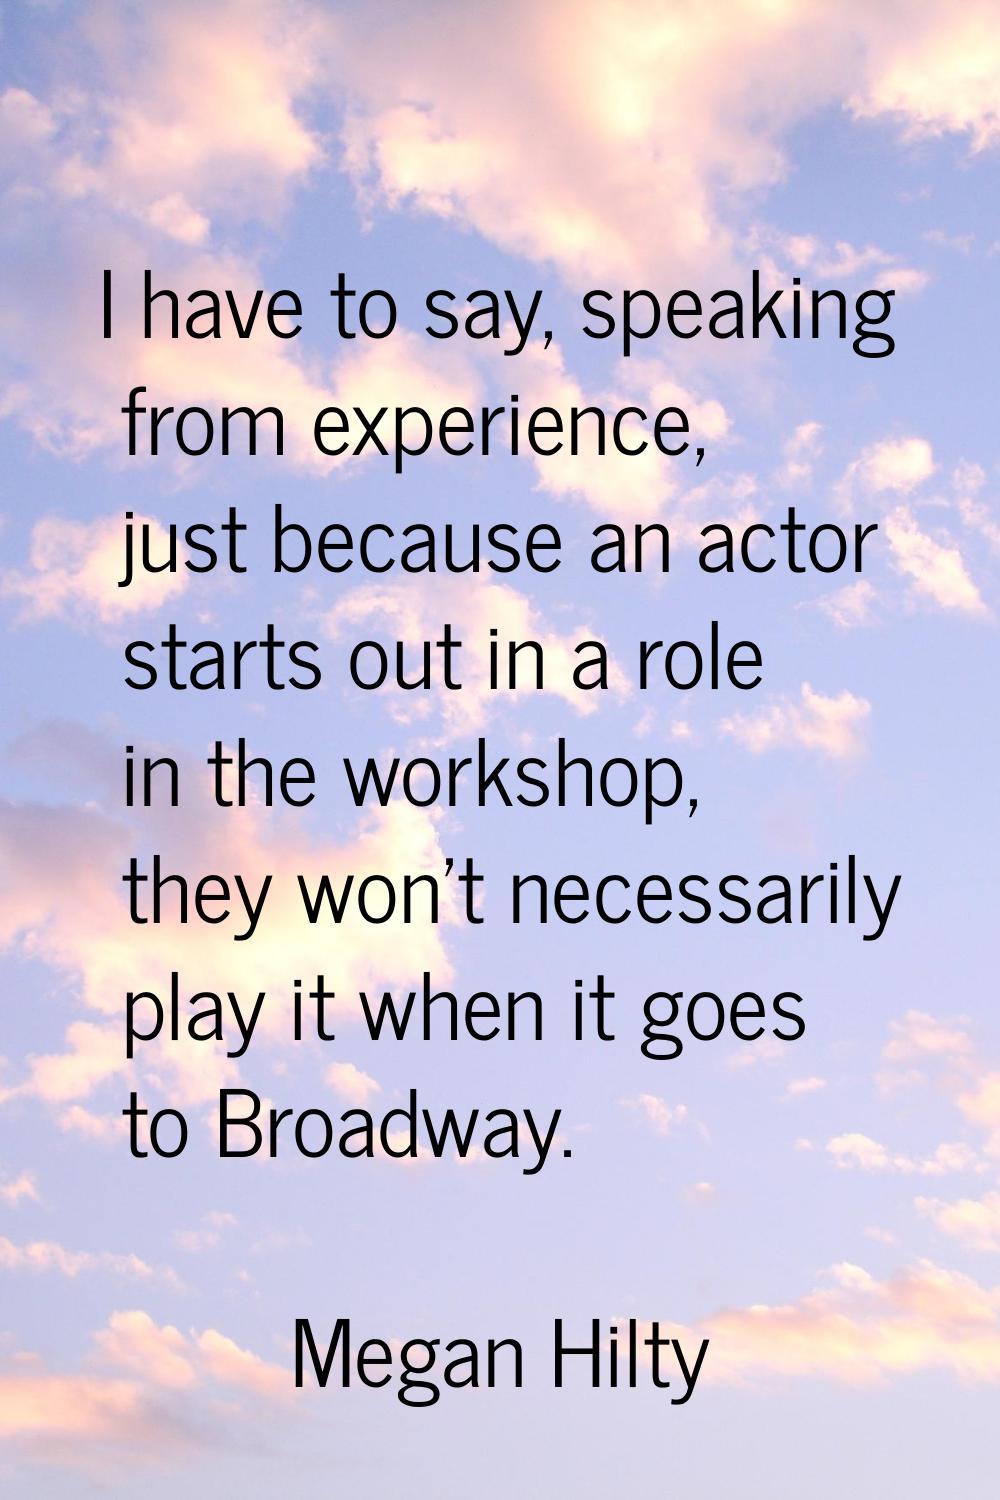 I have to say, speaking from experience, just because an actor starts out in a role in the workshop